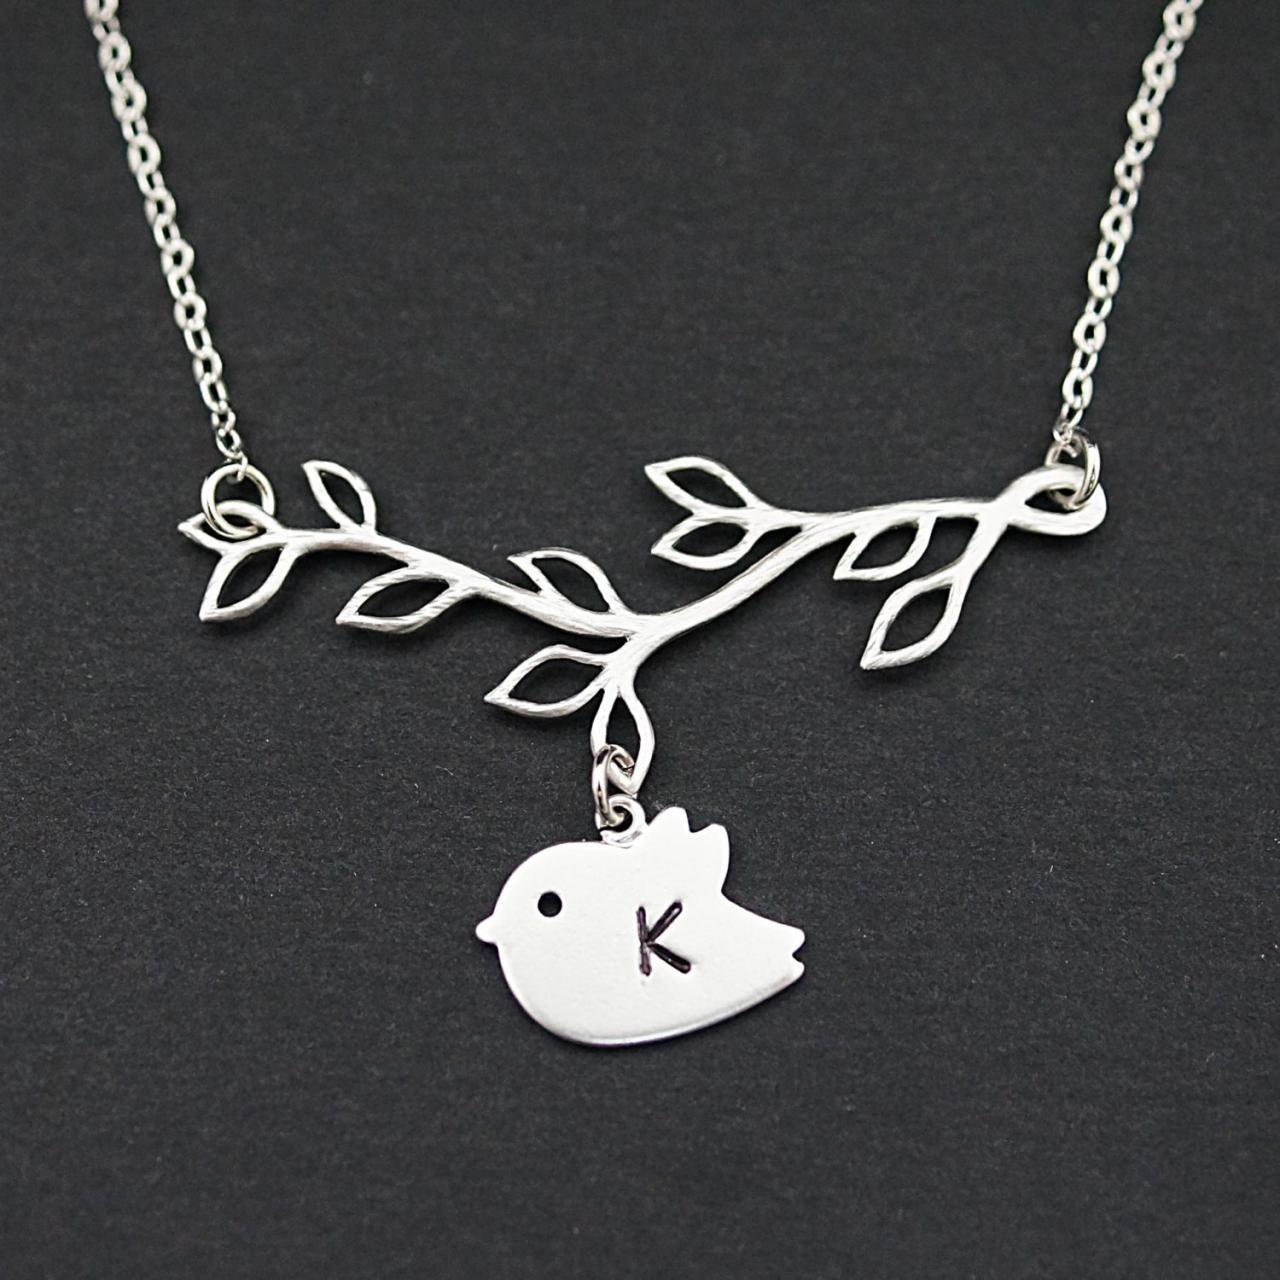 Initial Necklace, Personalized Jewelry, Twig With Mini Initial Bird Charm Personalized Necklace Name Necklace, Christmas Gift